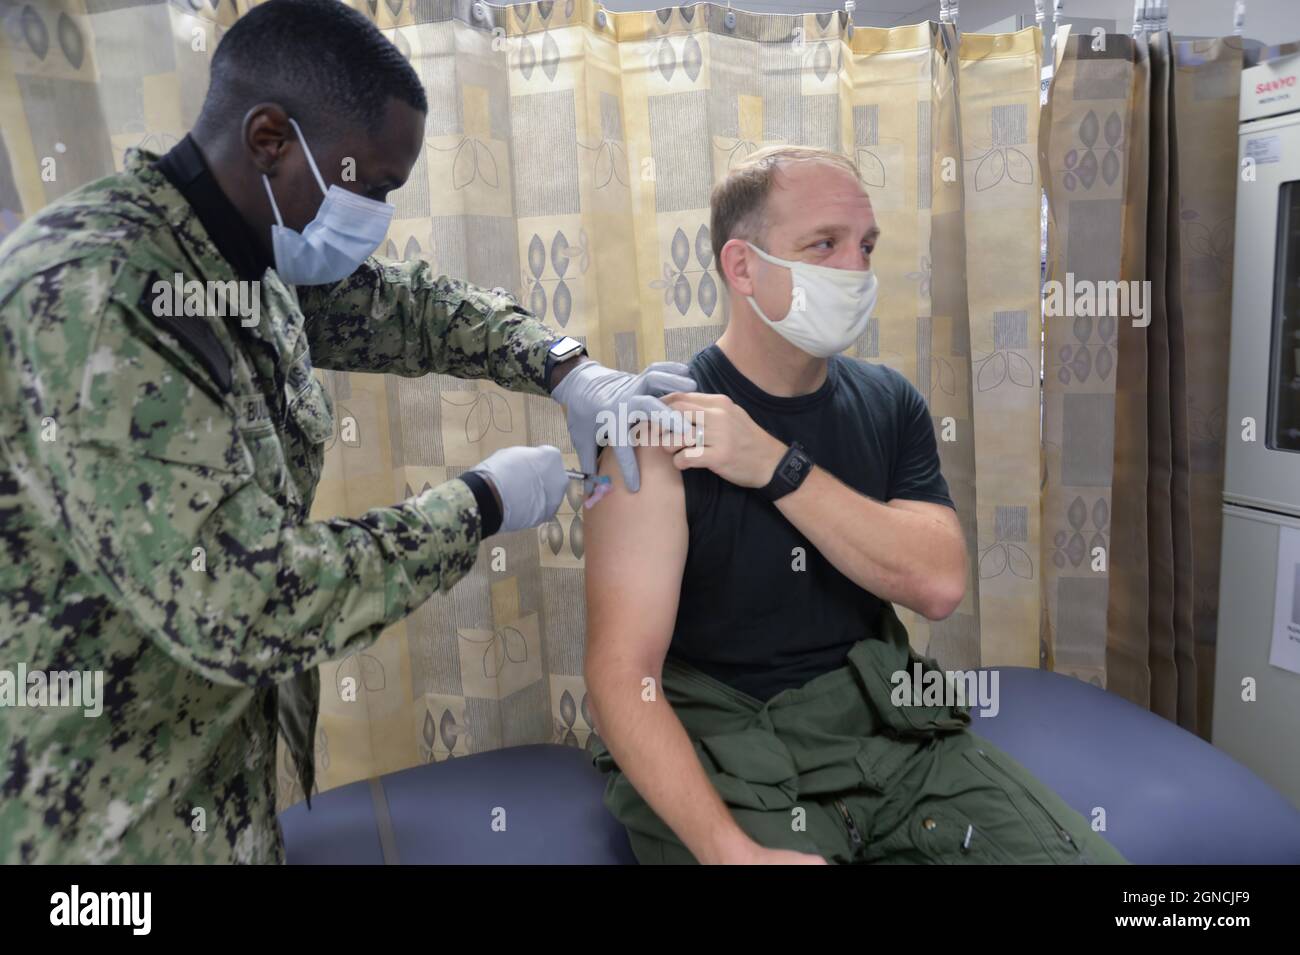 PORTSMOUTH, Va. (Jan. 5, 2021) Capt. Daniel Prochazka, from Woodbridge, Virginia, executive officer of the Nimitz-class aircraft carrier USS Harry S. Truman (CVN 75), receives a COVID-19 vaccination at Naval Medical Center Portsmouth. Harry S. Truman is currently in Norfolk Naval Shipyard for its extended carrier incremental availability period. (U.S. Navy photo by Mass Communication Specialist Seaman Tyler Bergstrom) Stock Photo